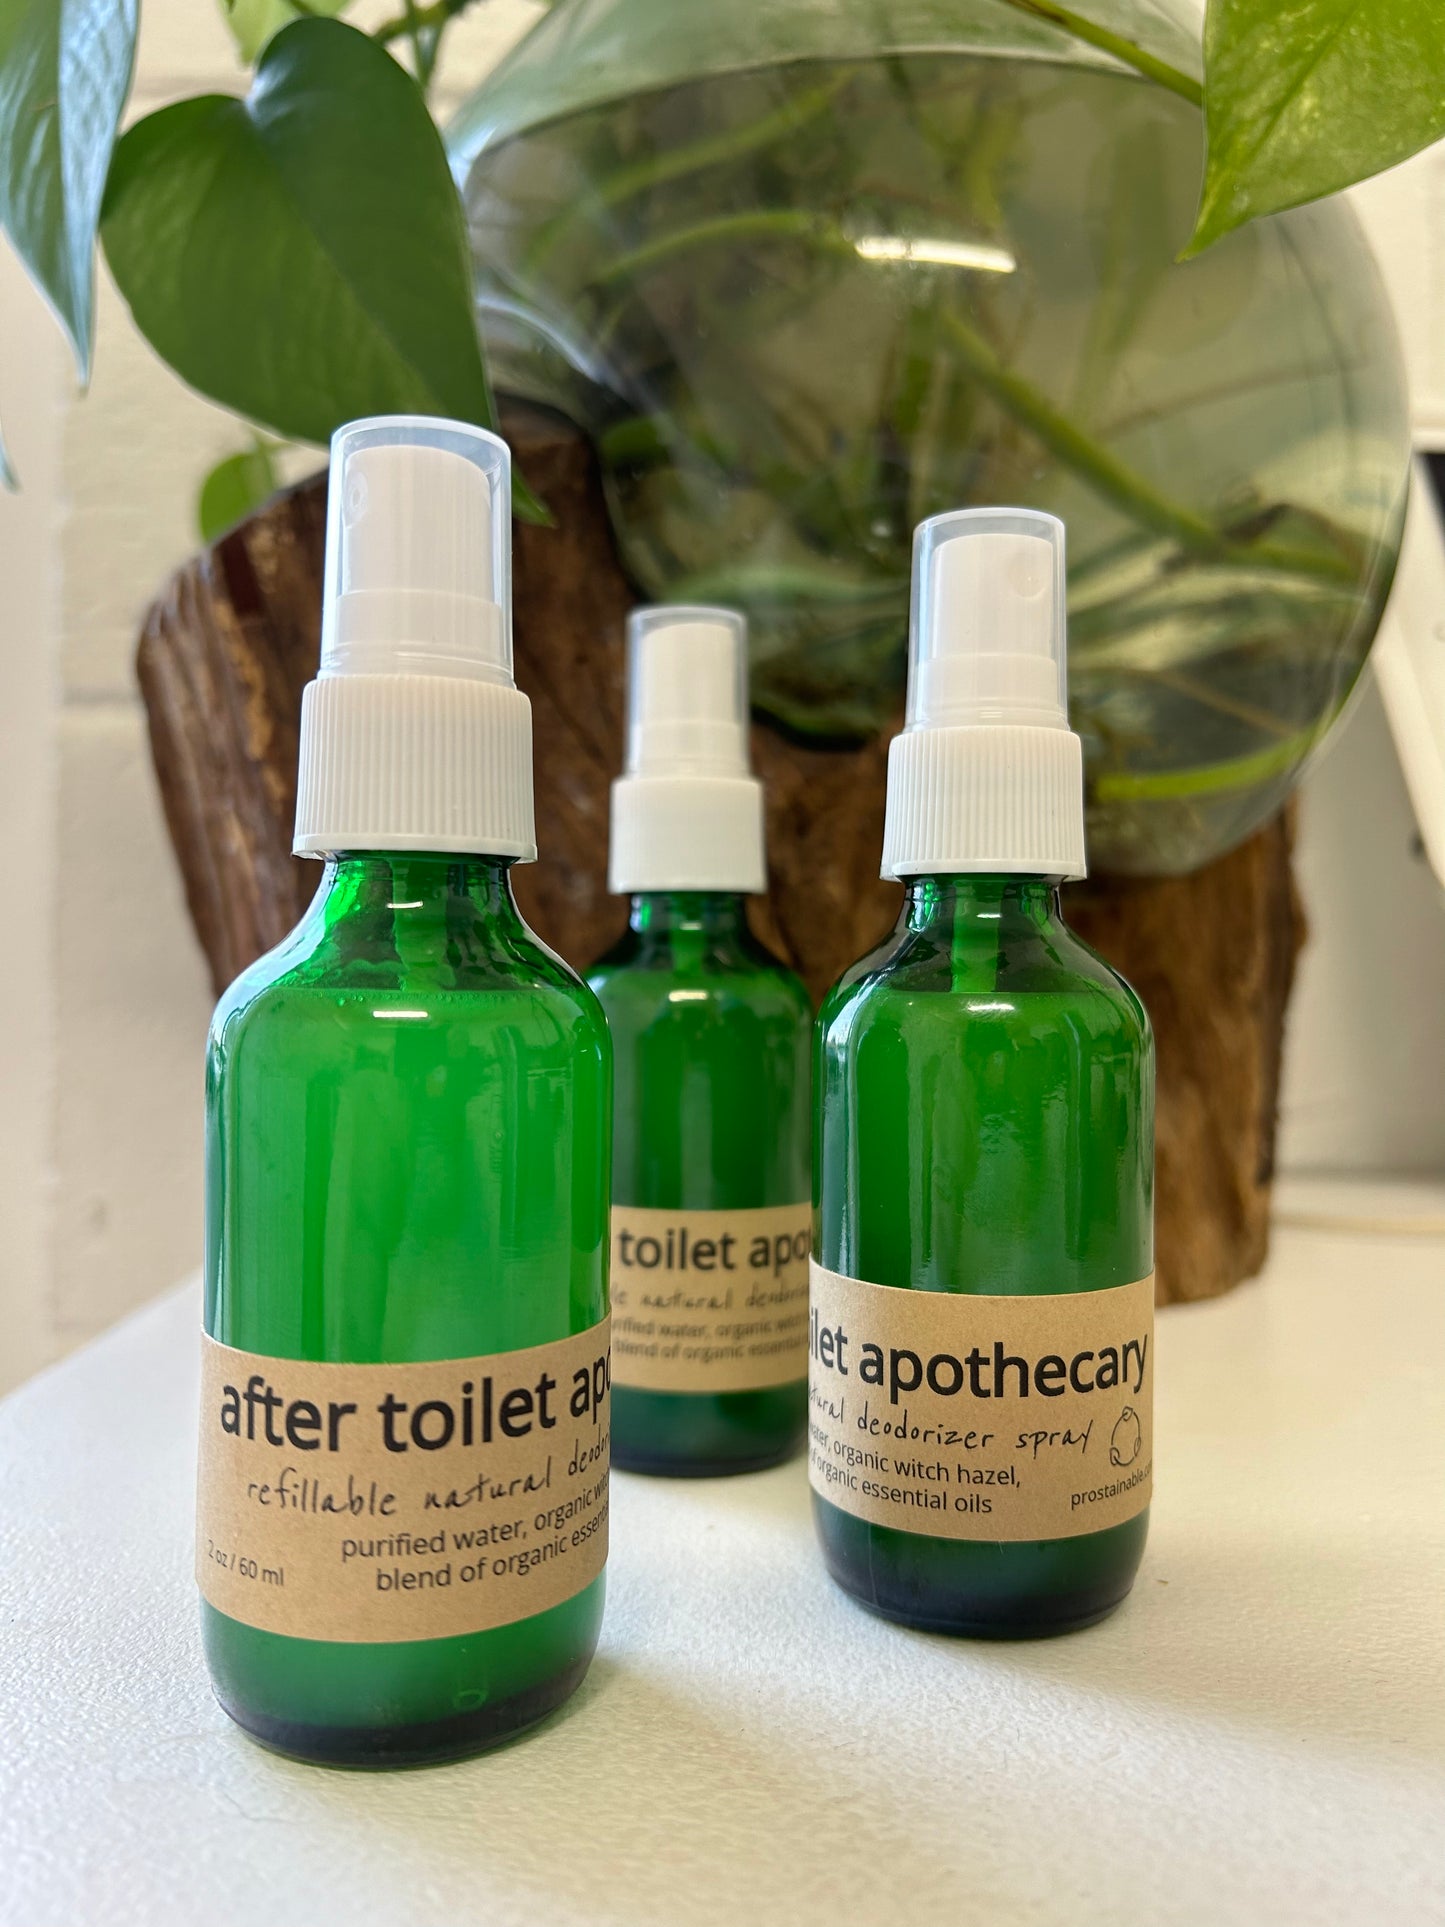 After Toilet Apothecary